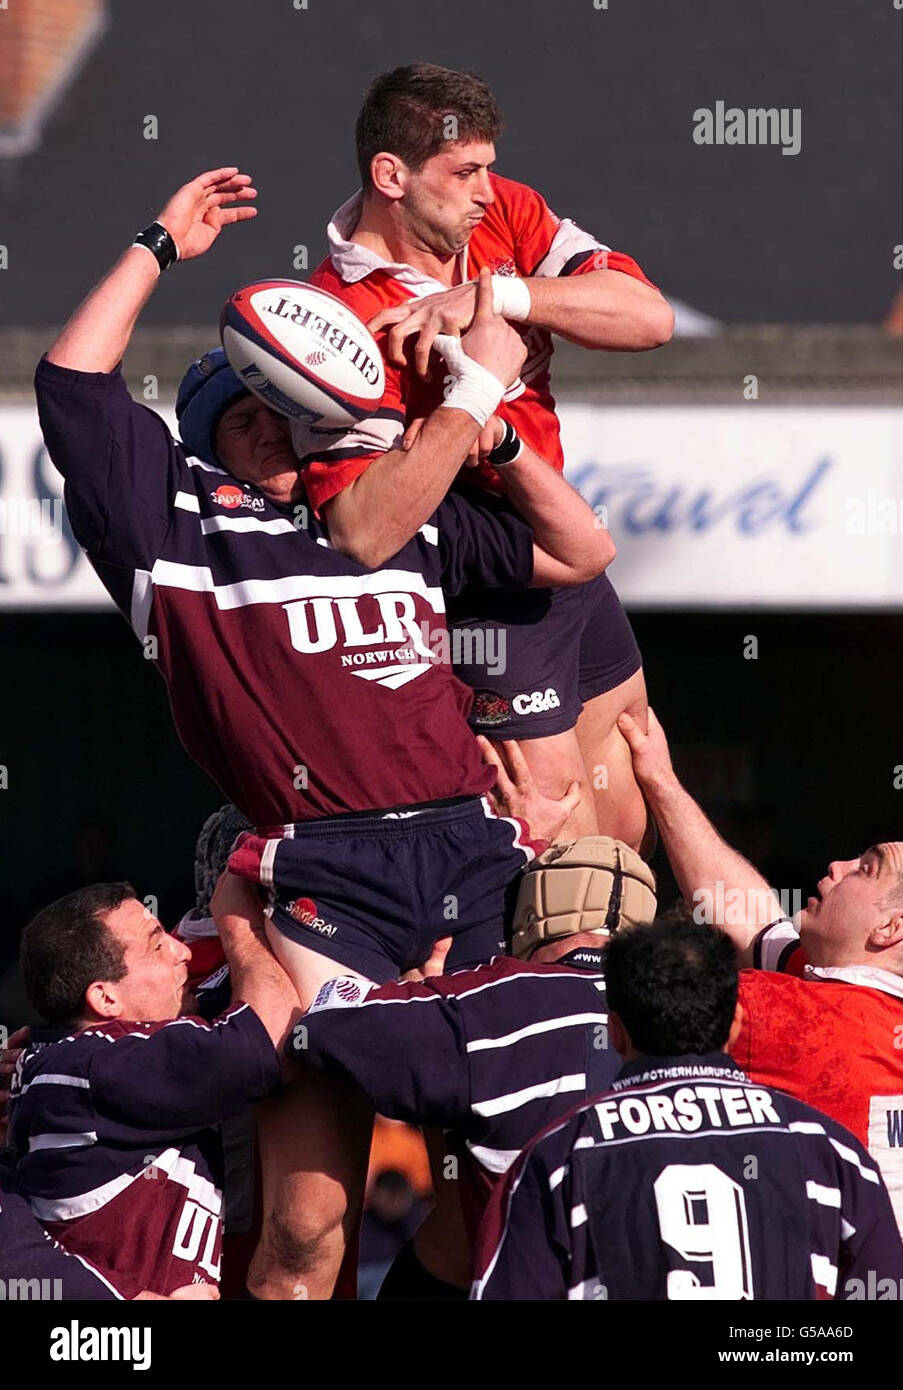 Gloucester's Rob Fidler (right) leaps above Rotherham's Leon Greeff to win the line out during their Zurich Premiership match at Kingsholm, Gloucester. Stock Photo